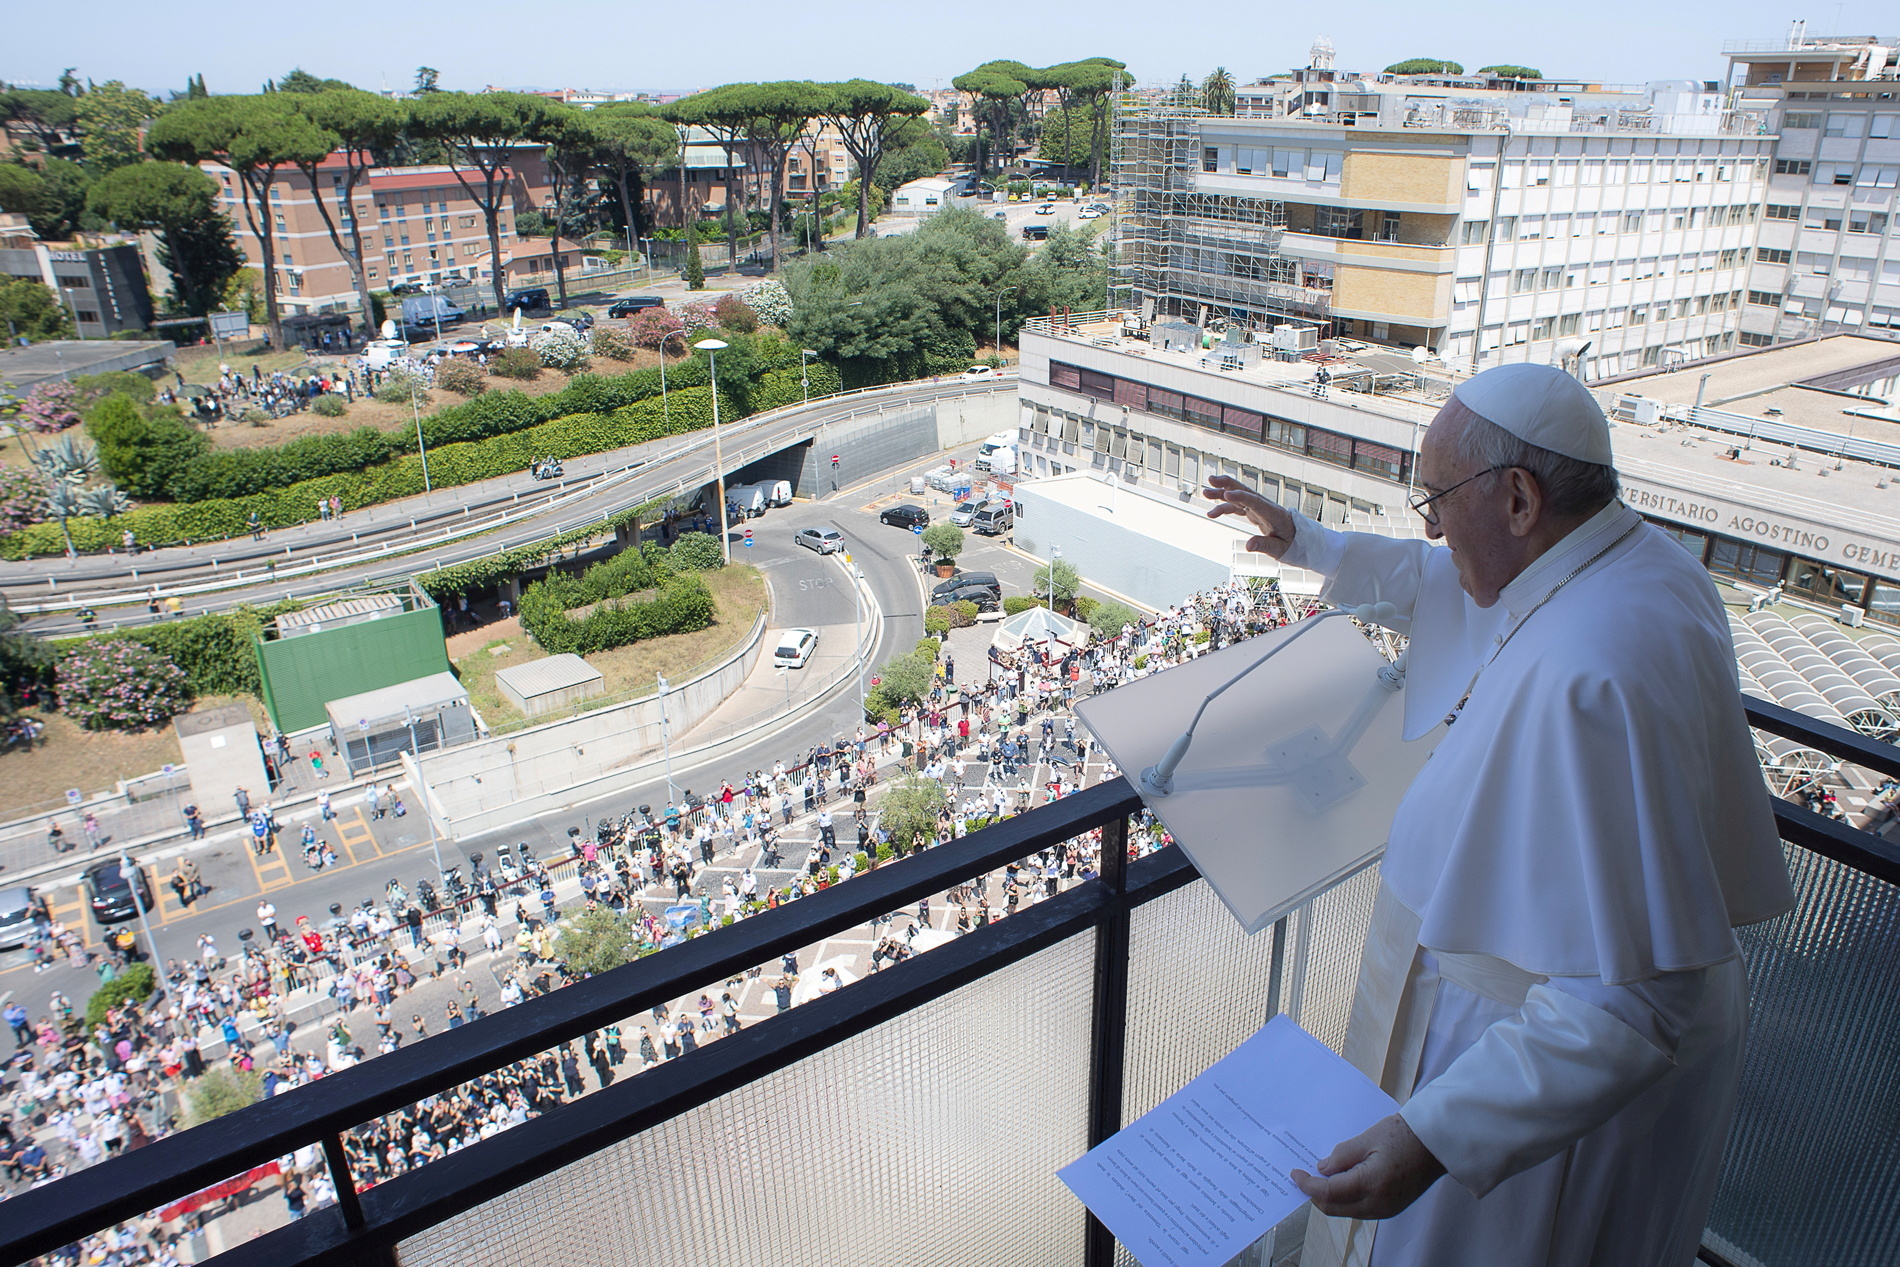 Pope Francis leads the Angelus prayer from Gemelli hospital in Rome